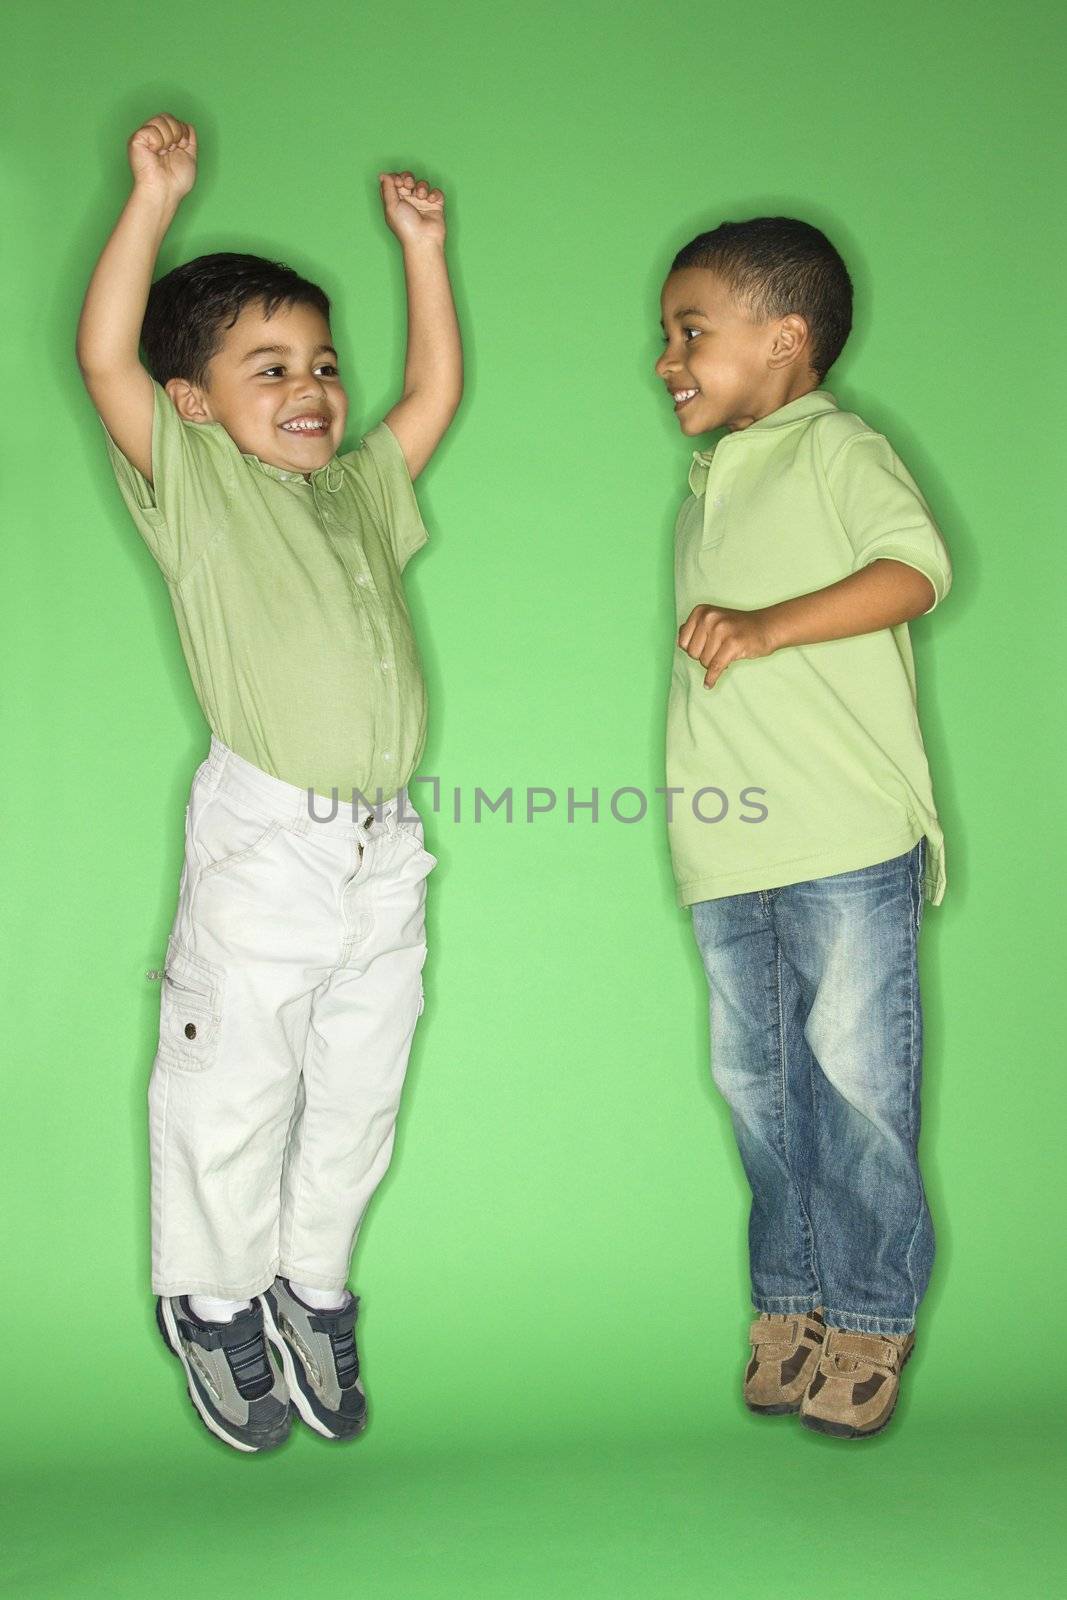 Hispanic and African American male child jumping.